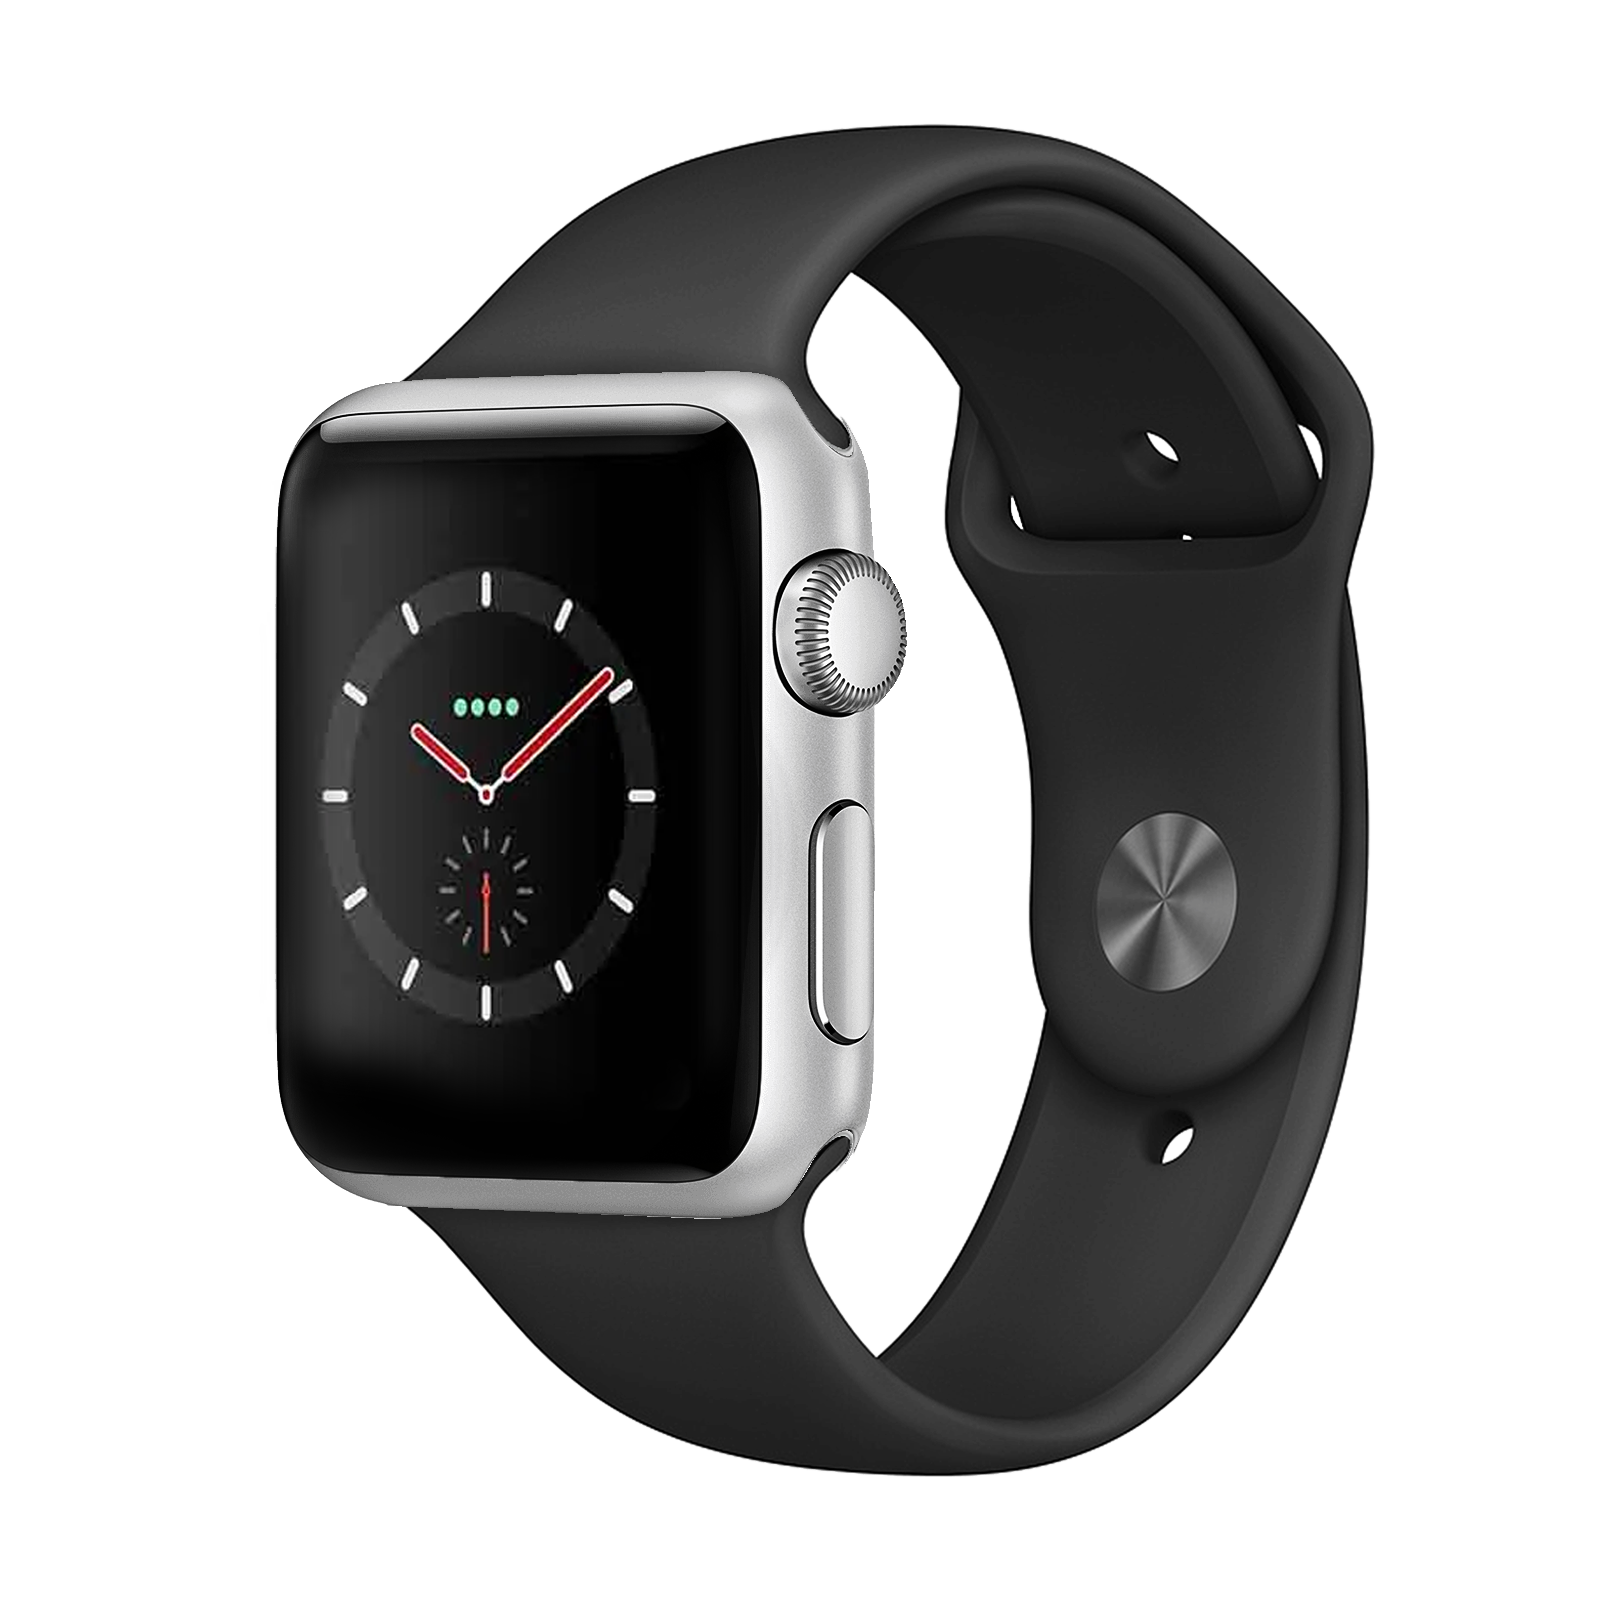 Apple Watch Series 3 Stainless 38mm Silver Good Cellular - Unlocked